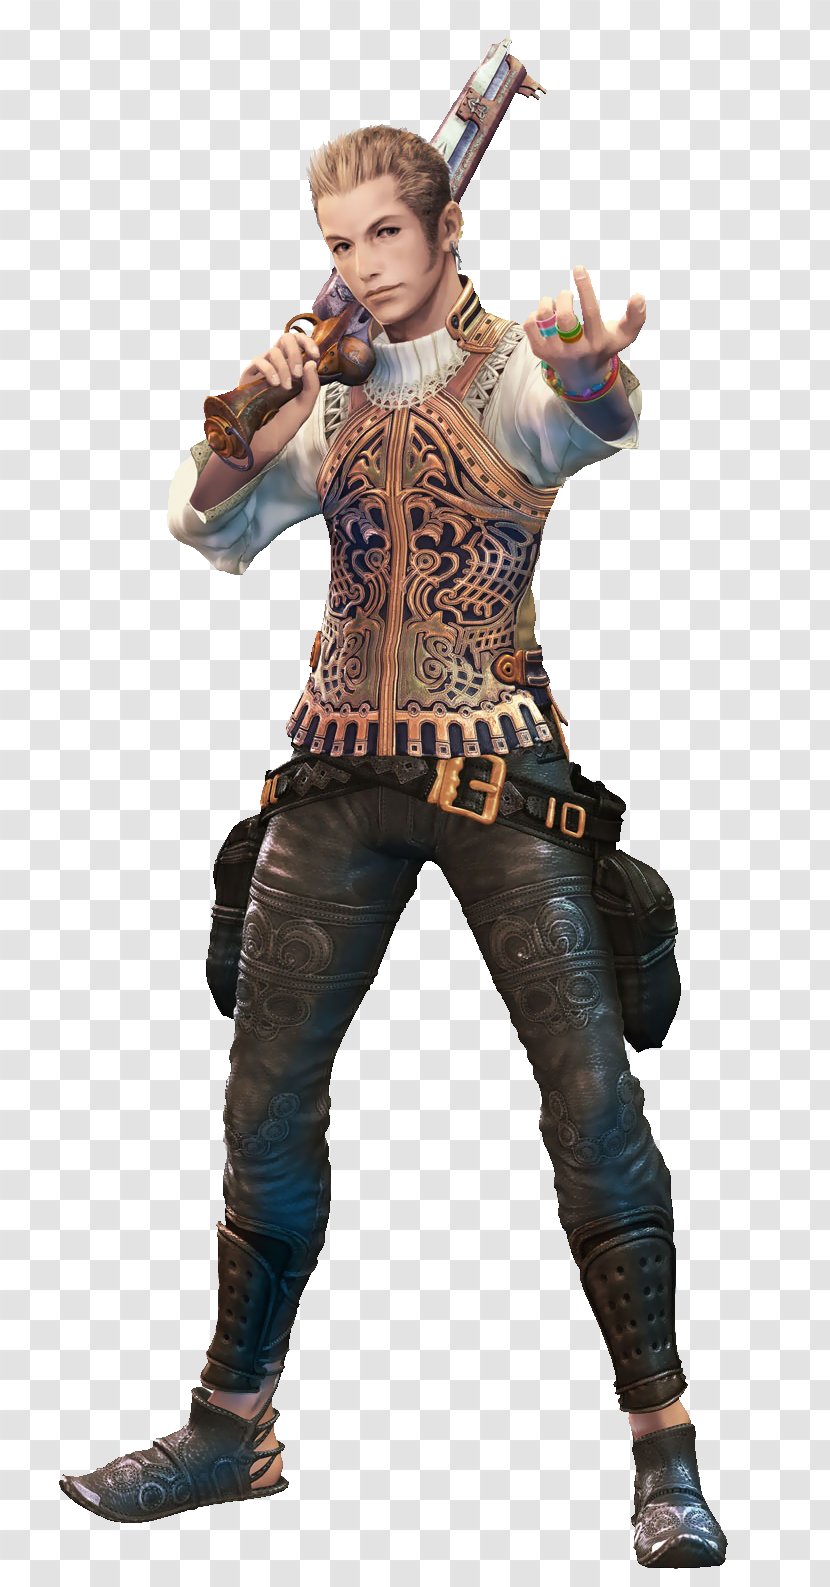 Final Fantasy XII: Revenant Wings Dissidia 012 Balthier - Gabranth - Dungeons And Dragons Transparent PNG